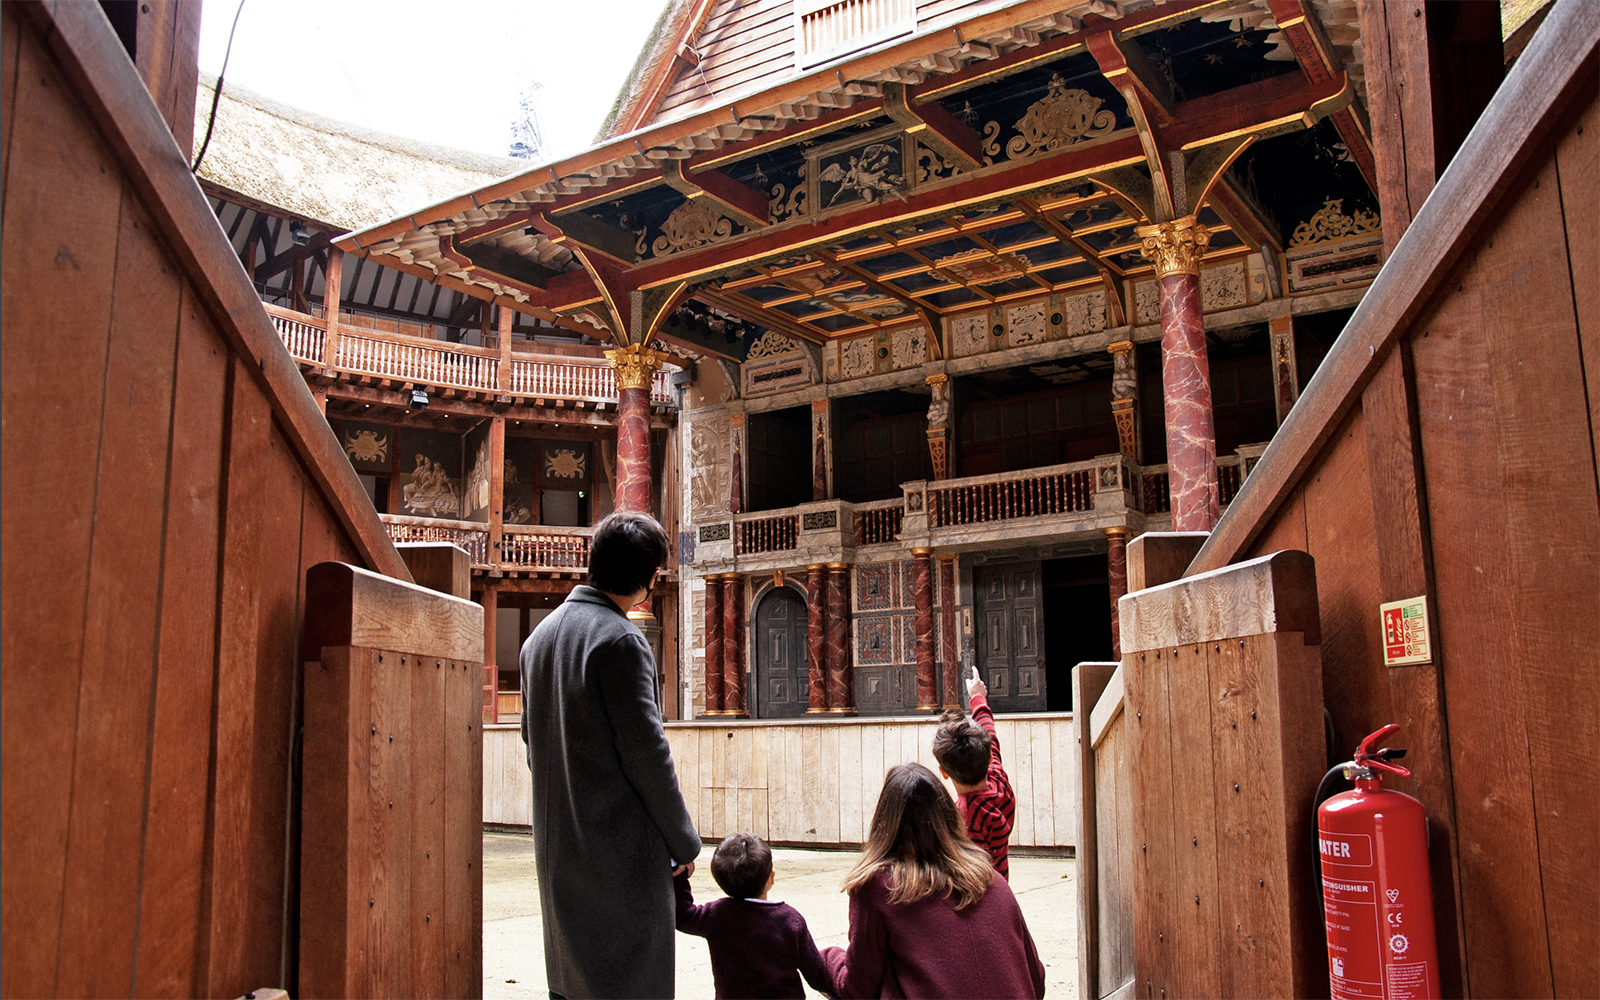 Two parents and two young children walk through the archway into the Yard of the Globe Theatre: pointing up at the painted heavens of the roof above the wooden stage.